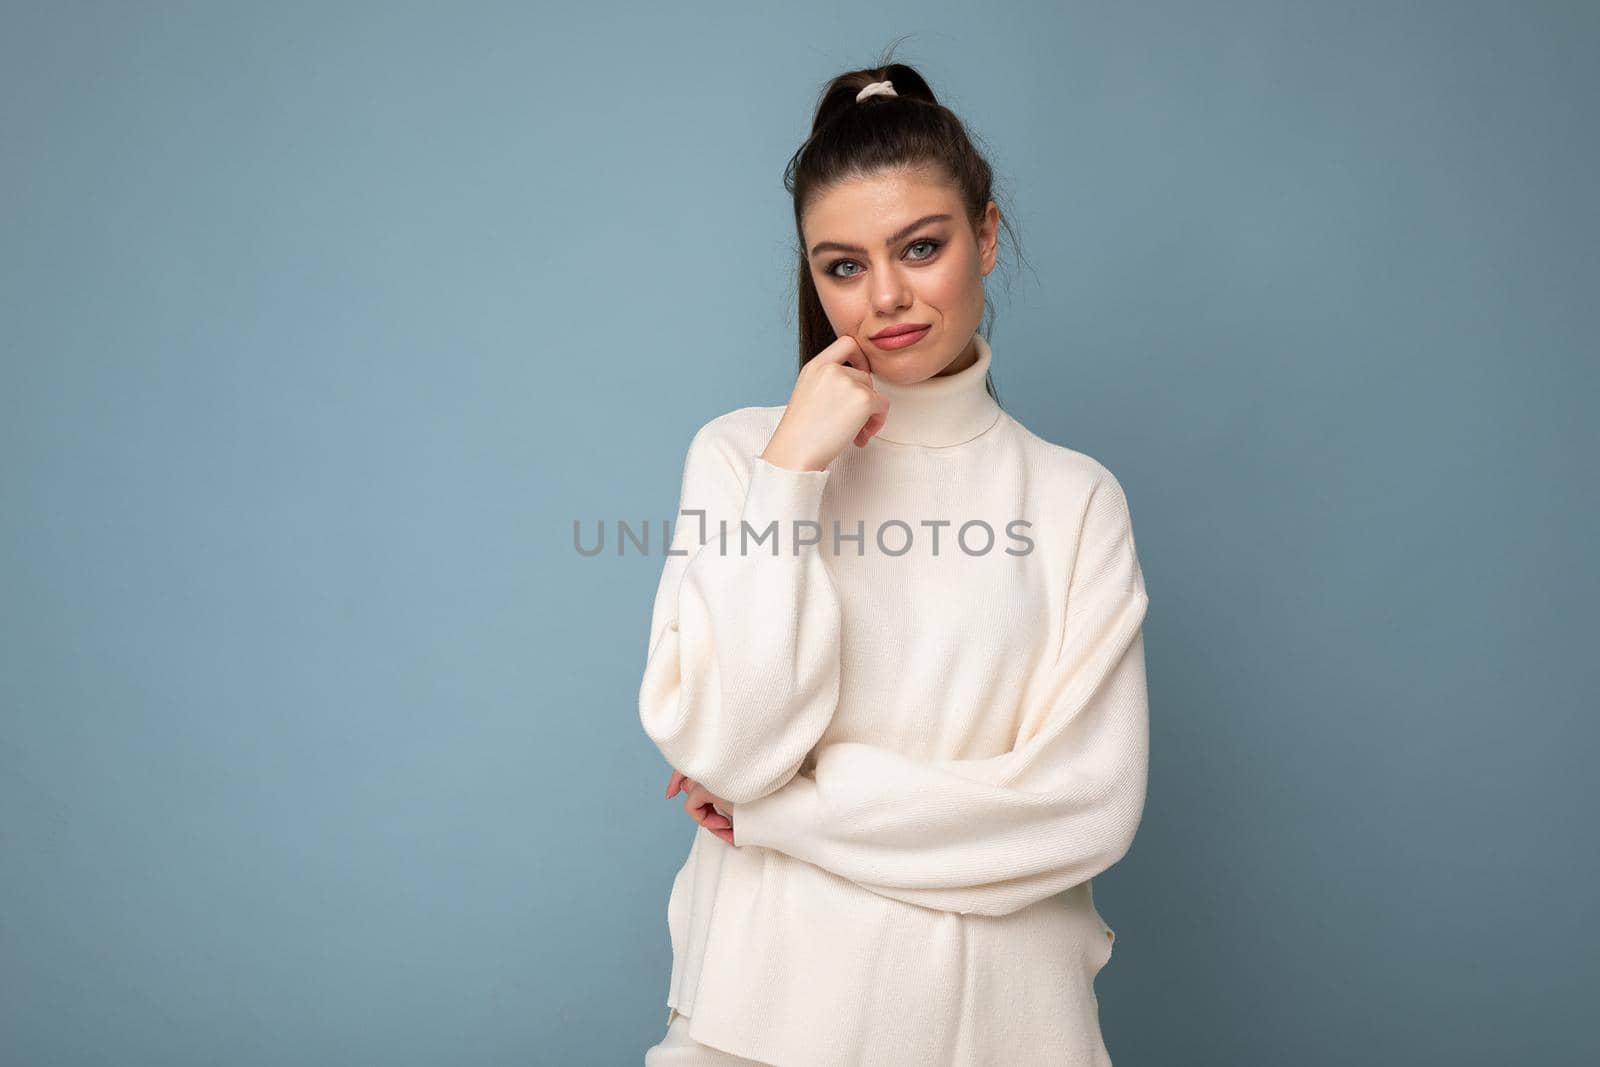 Young sad brunette woman with wearing white casual sweater isolated over blue background looking confident at the camera with crossed arms and hand raised on chin.